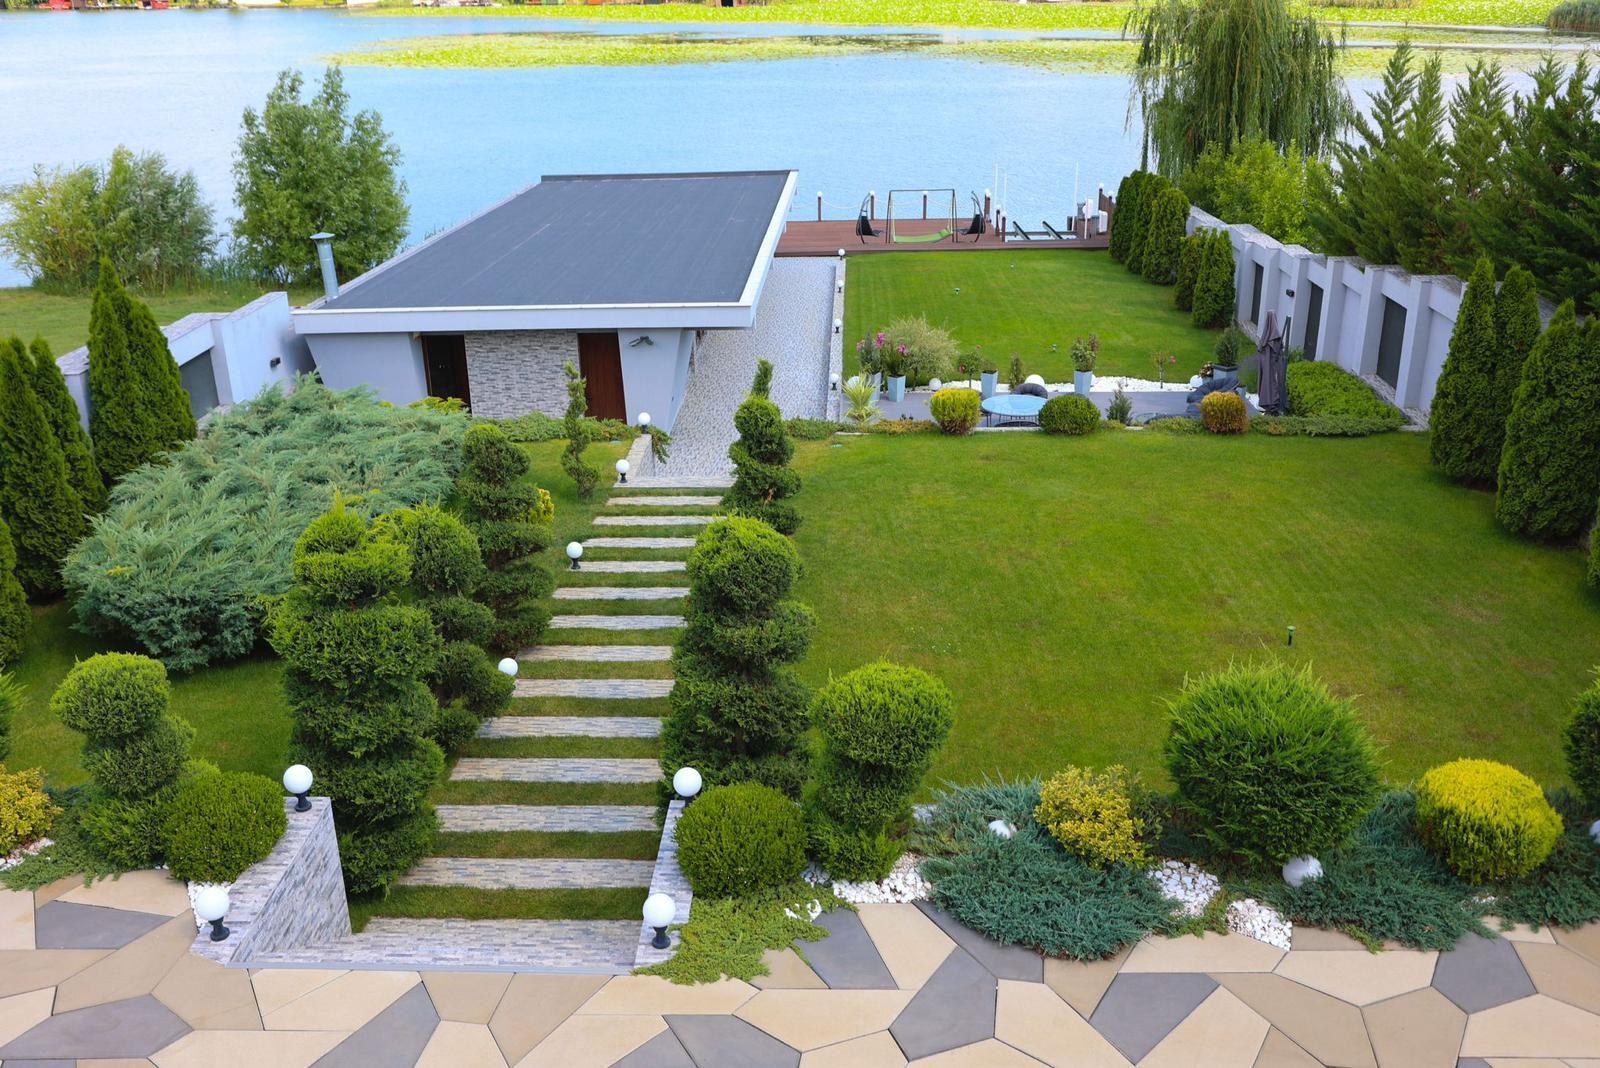 Snagov | Luxurious Waterfront Villa with Panoramic View